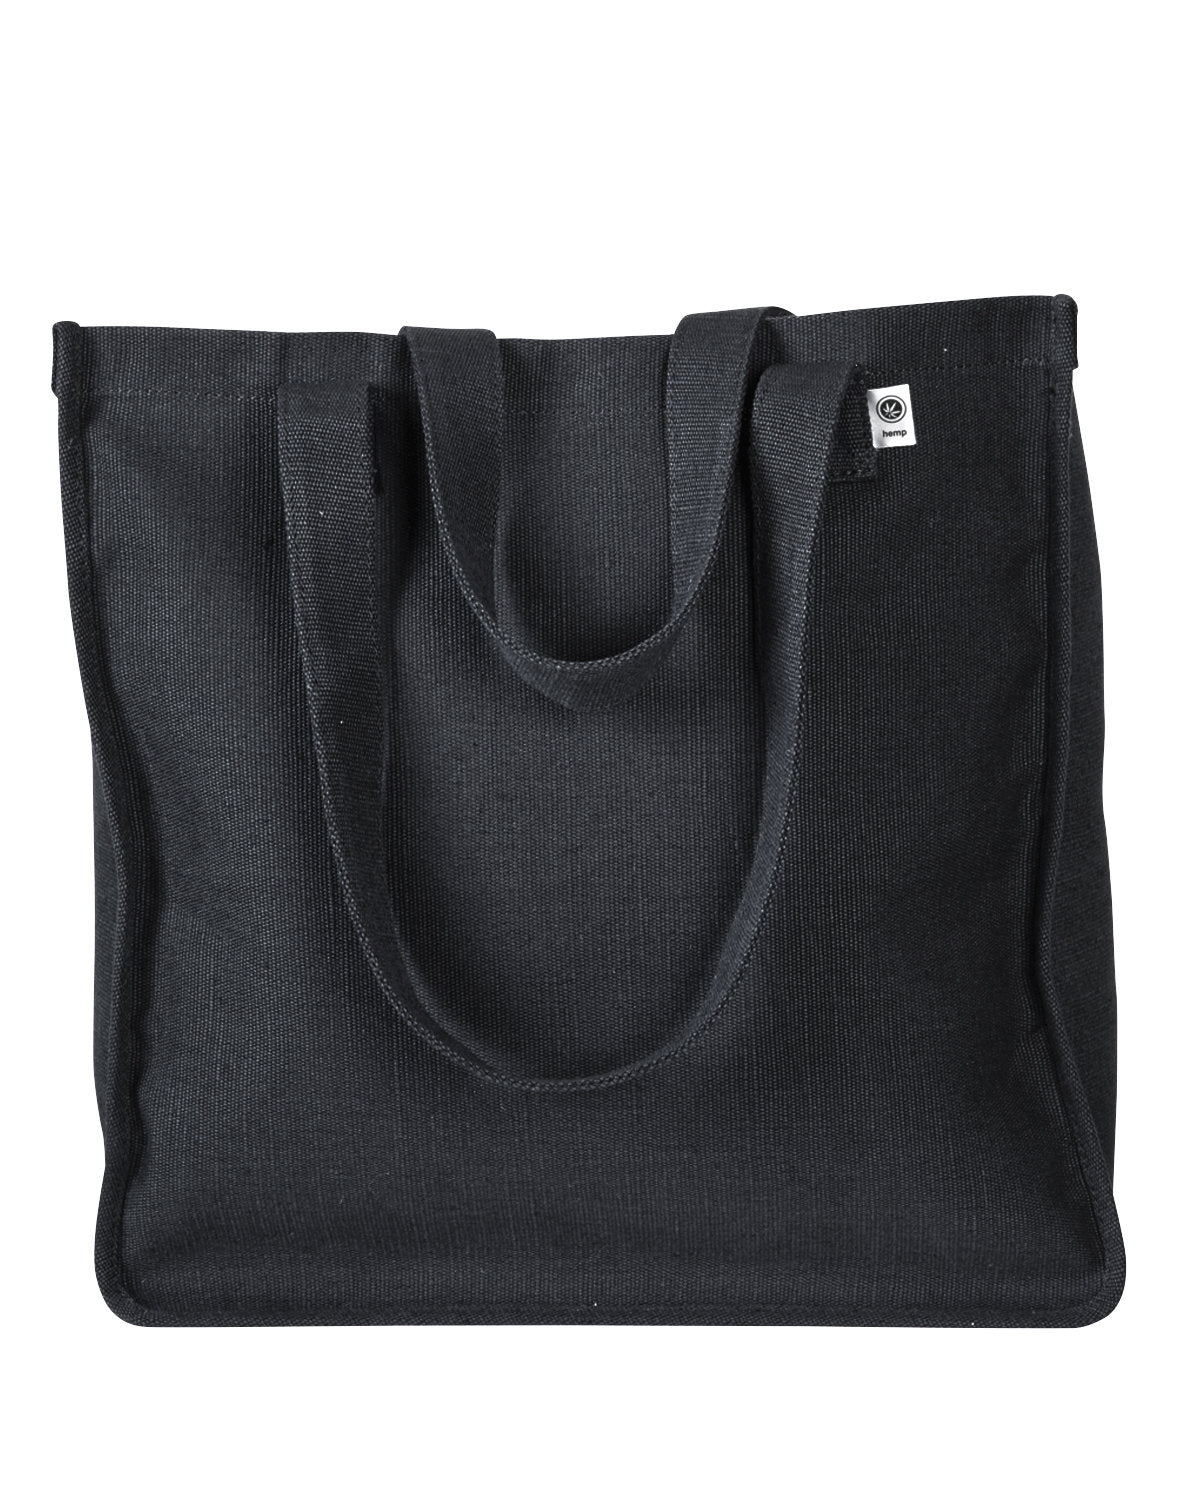 Bags and Accessories BLACK OS econscious